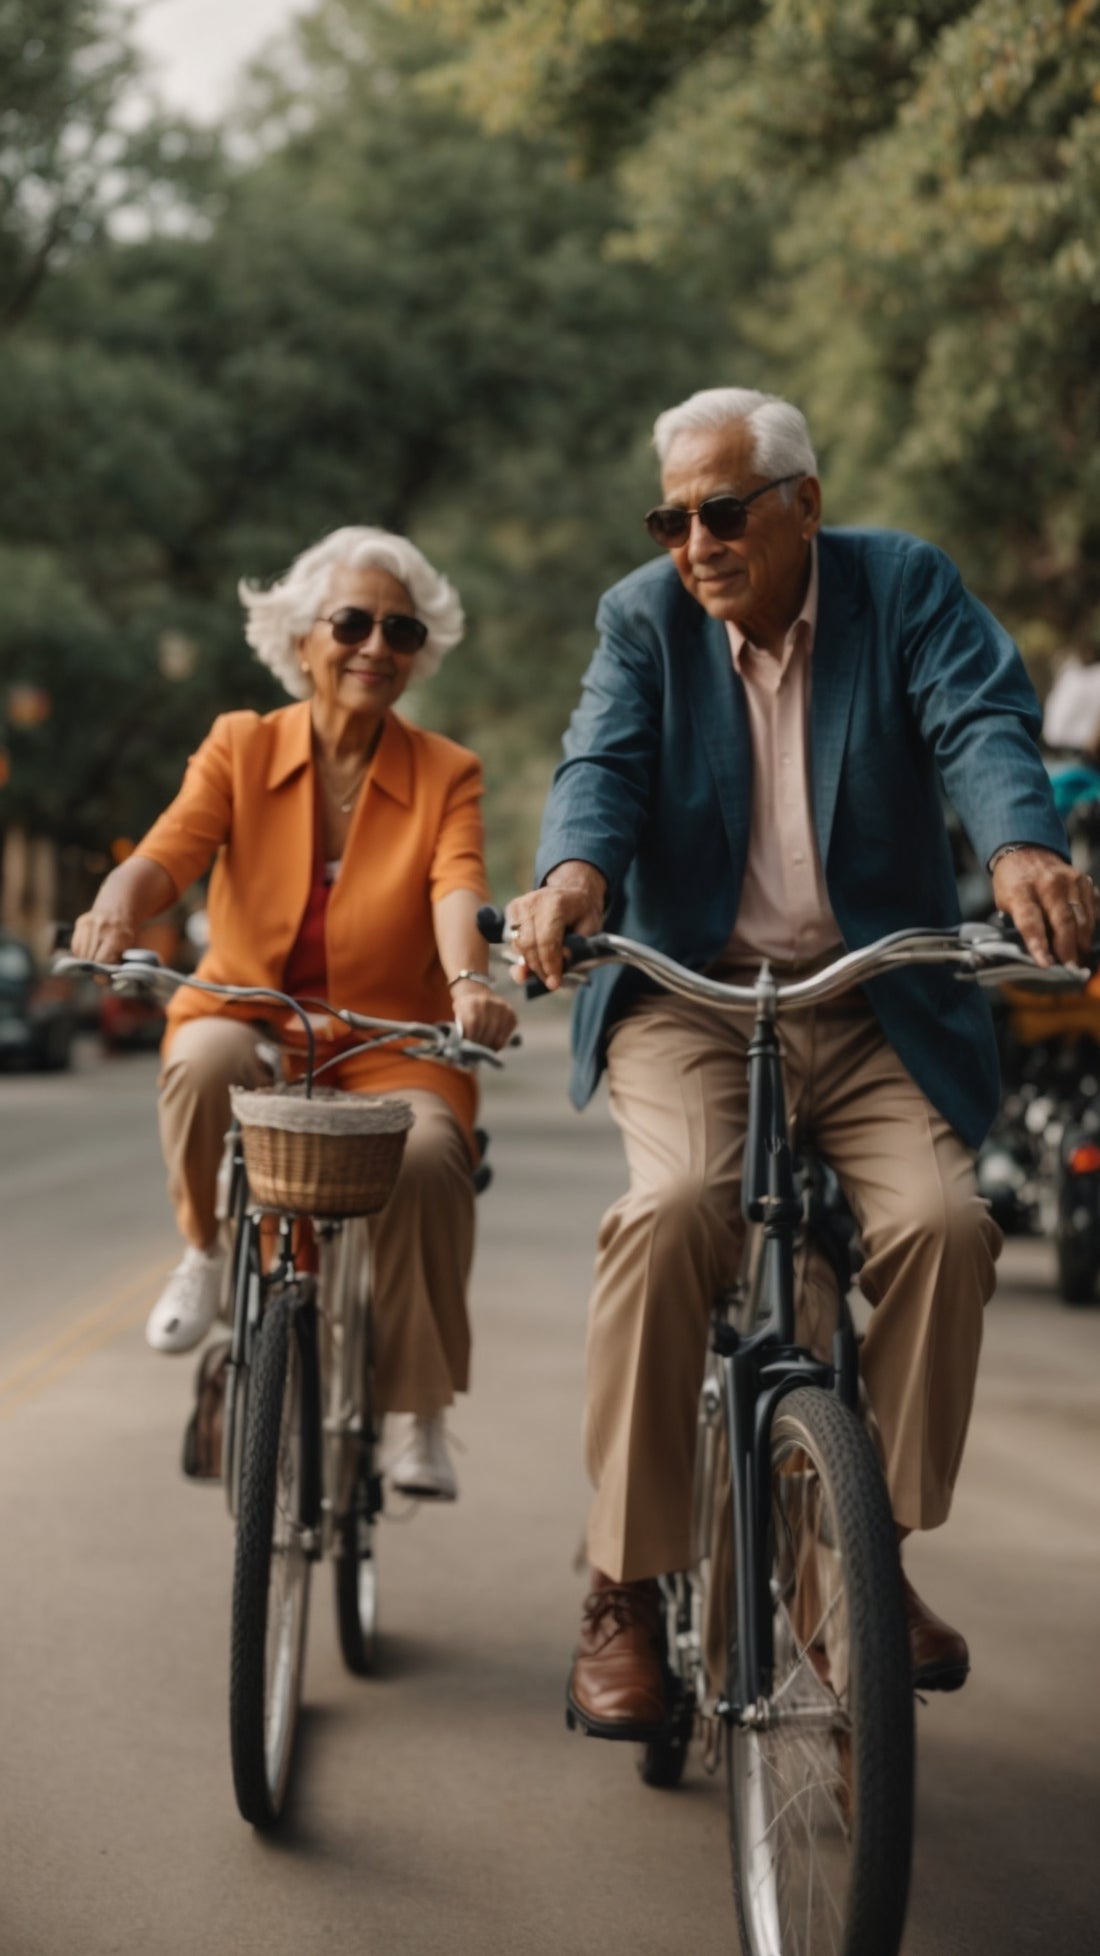 Ebikes Keeping People Fit and Happy